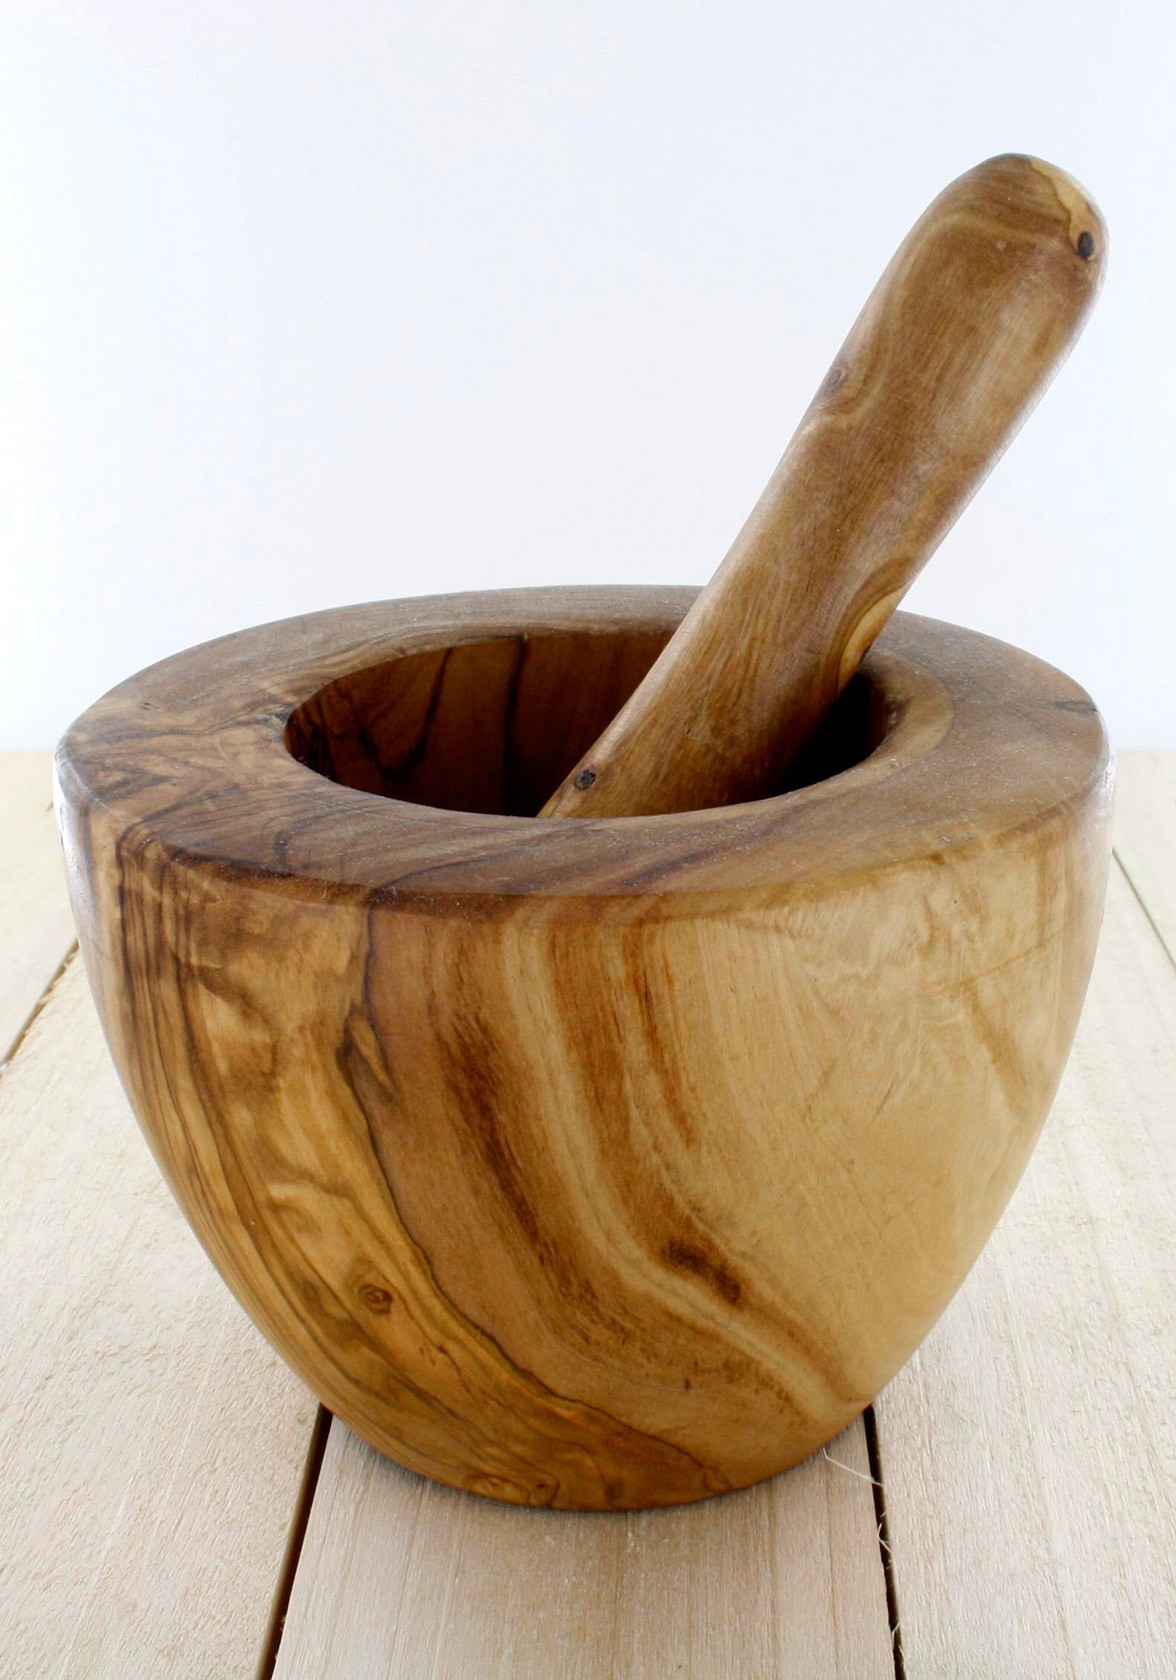 How To Care For Wooden Mortar And Pestle